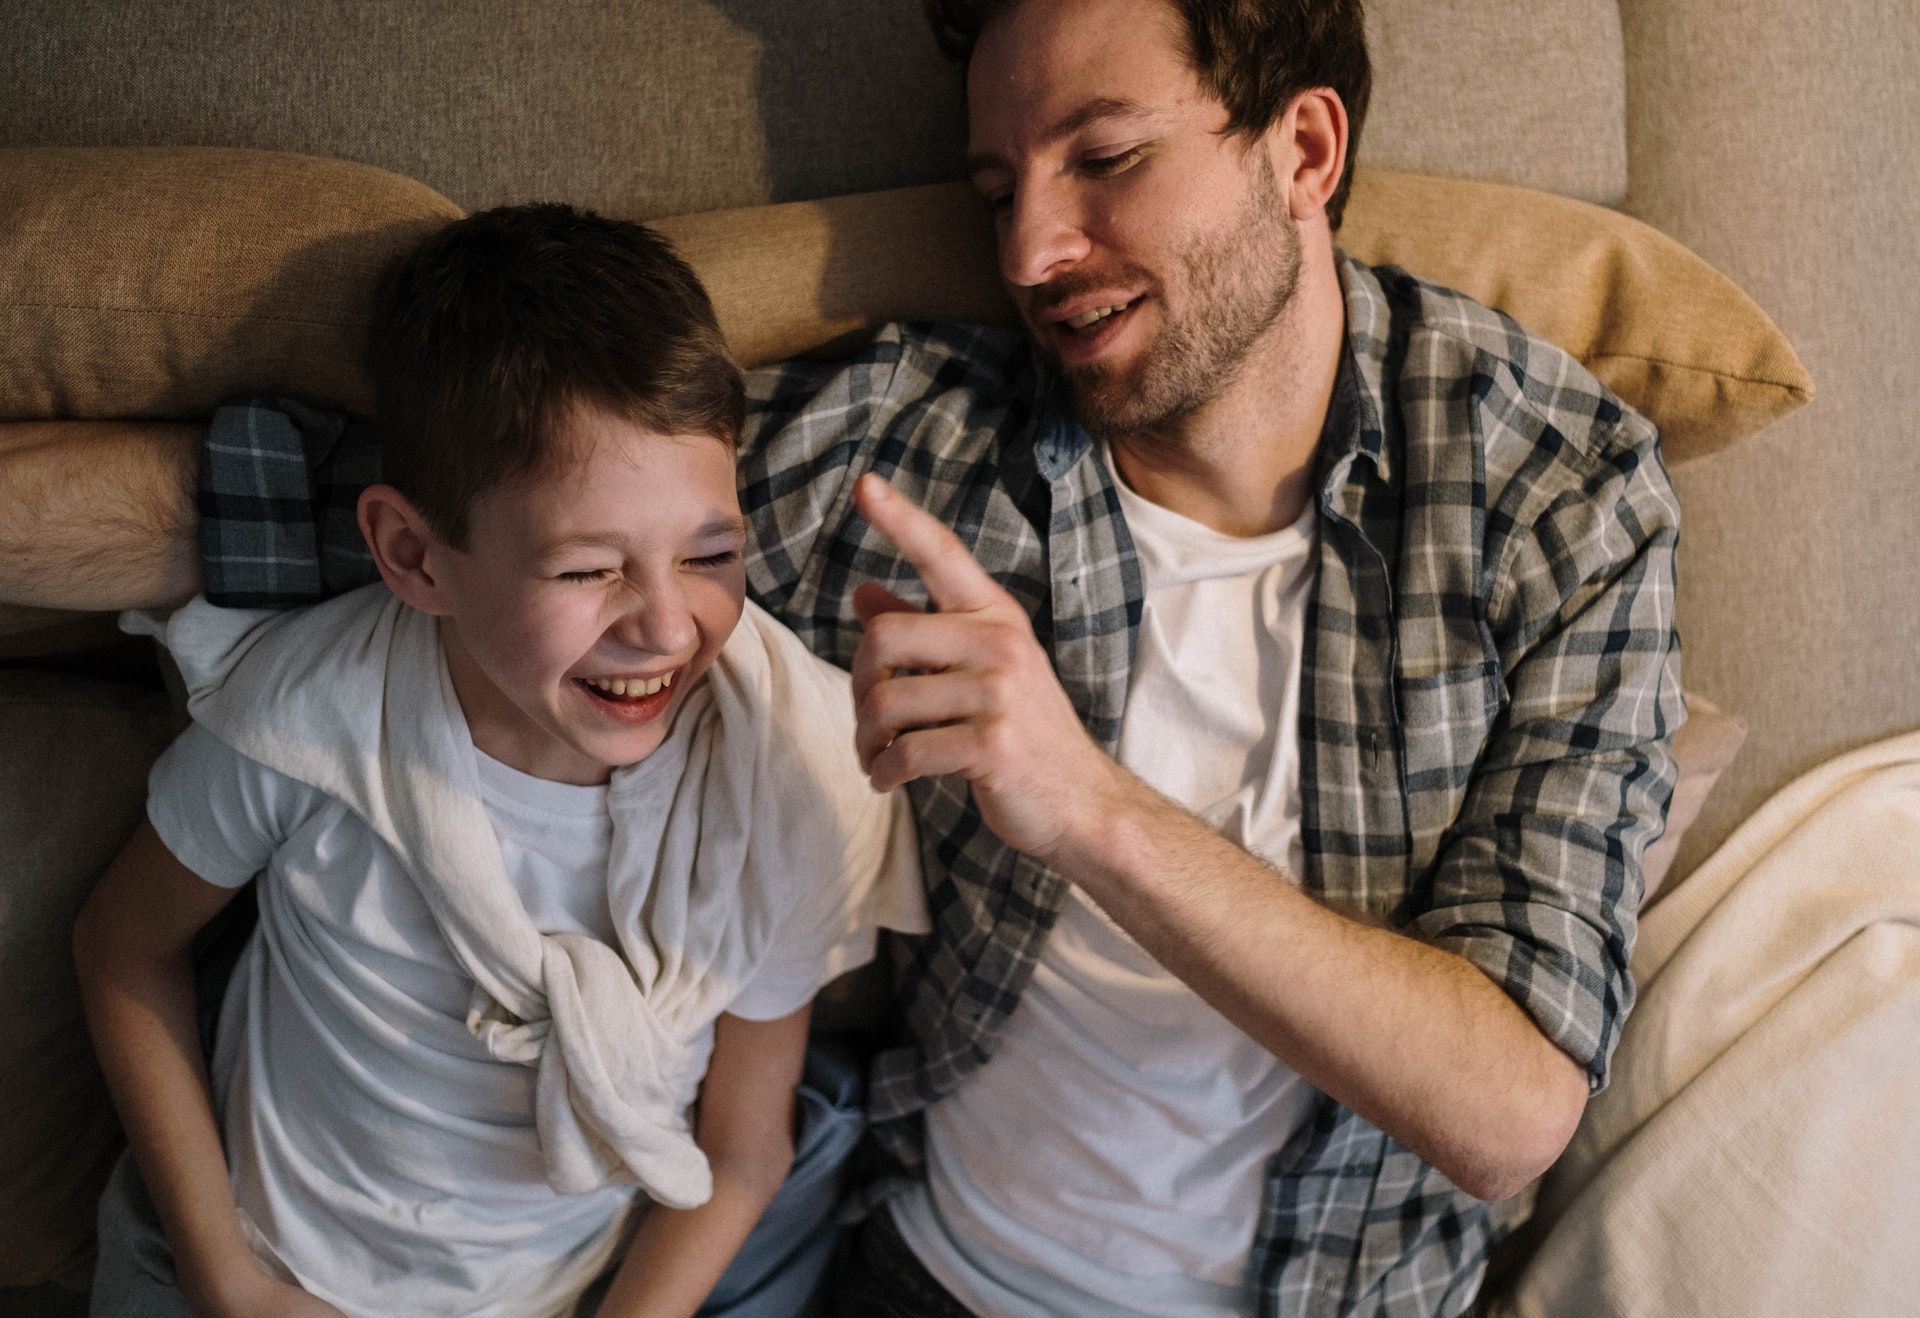 Dad laughs with son.